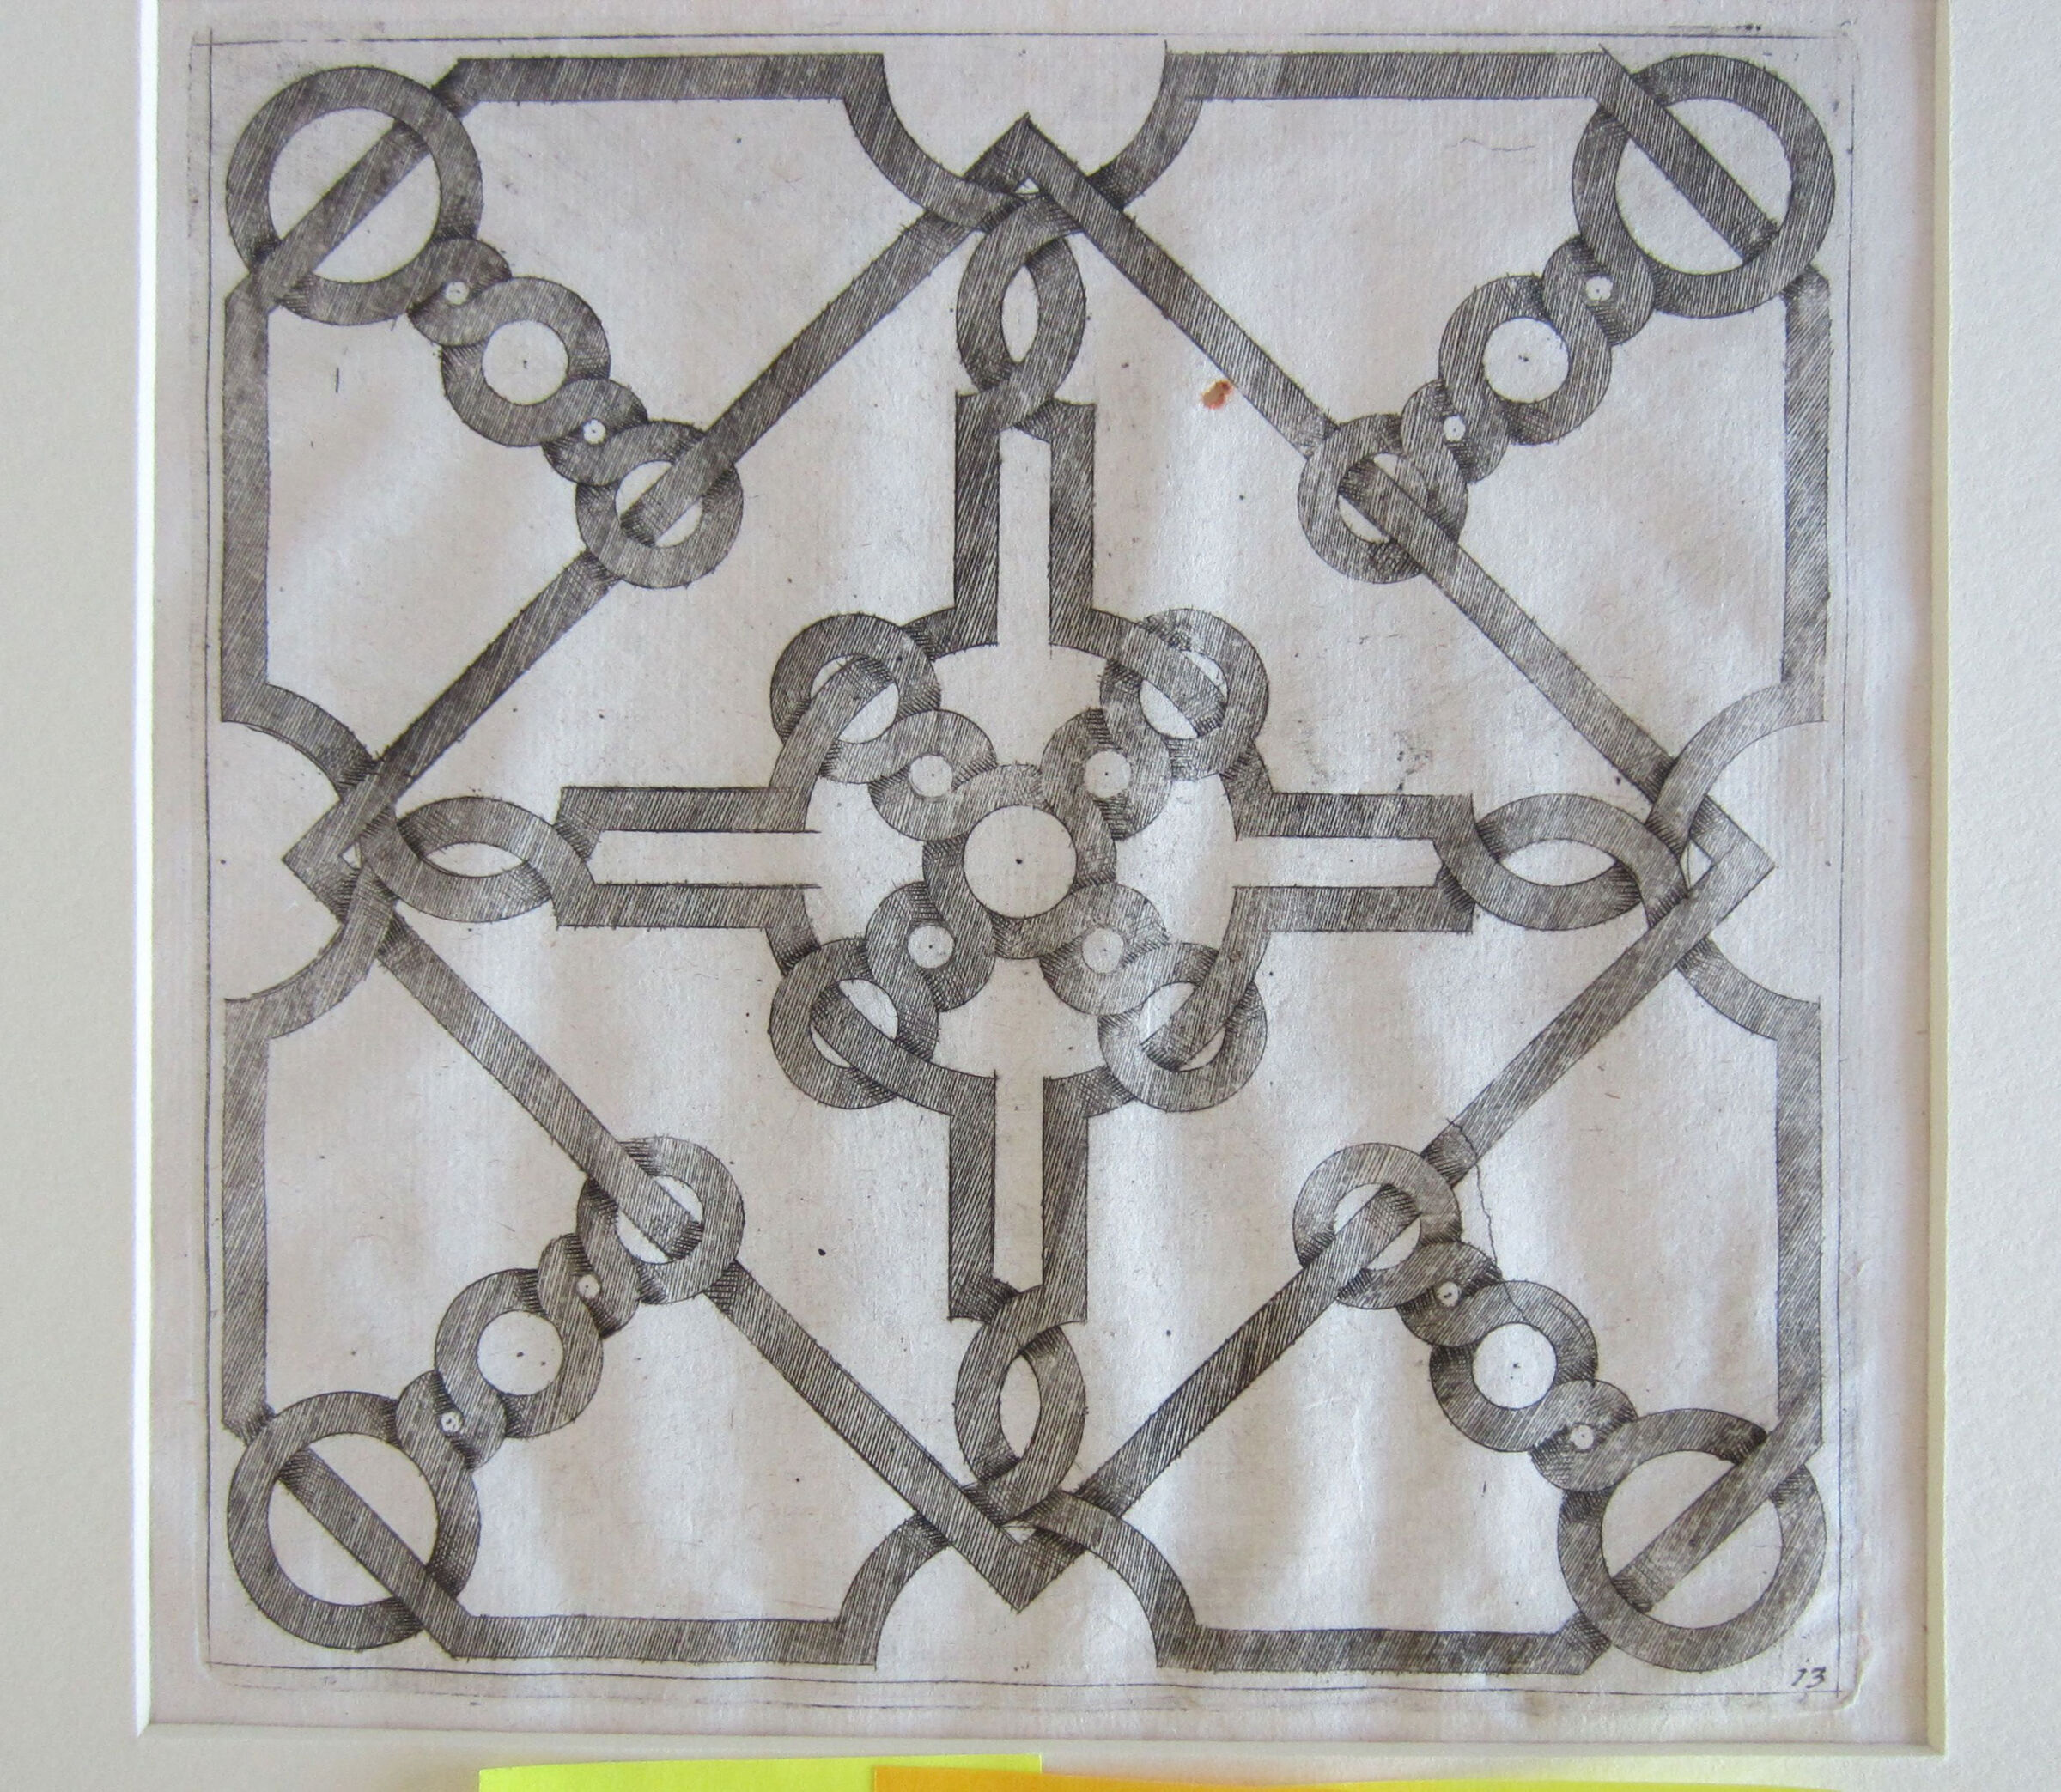 Interlace Centered By A Diagonal Four-Armed Ornament, The Plate With An Outlined Border